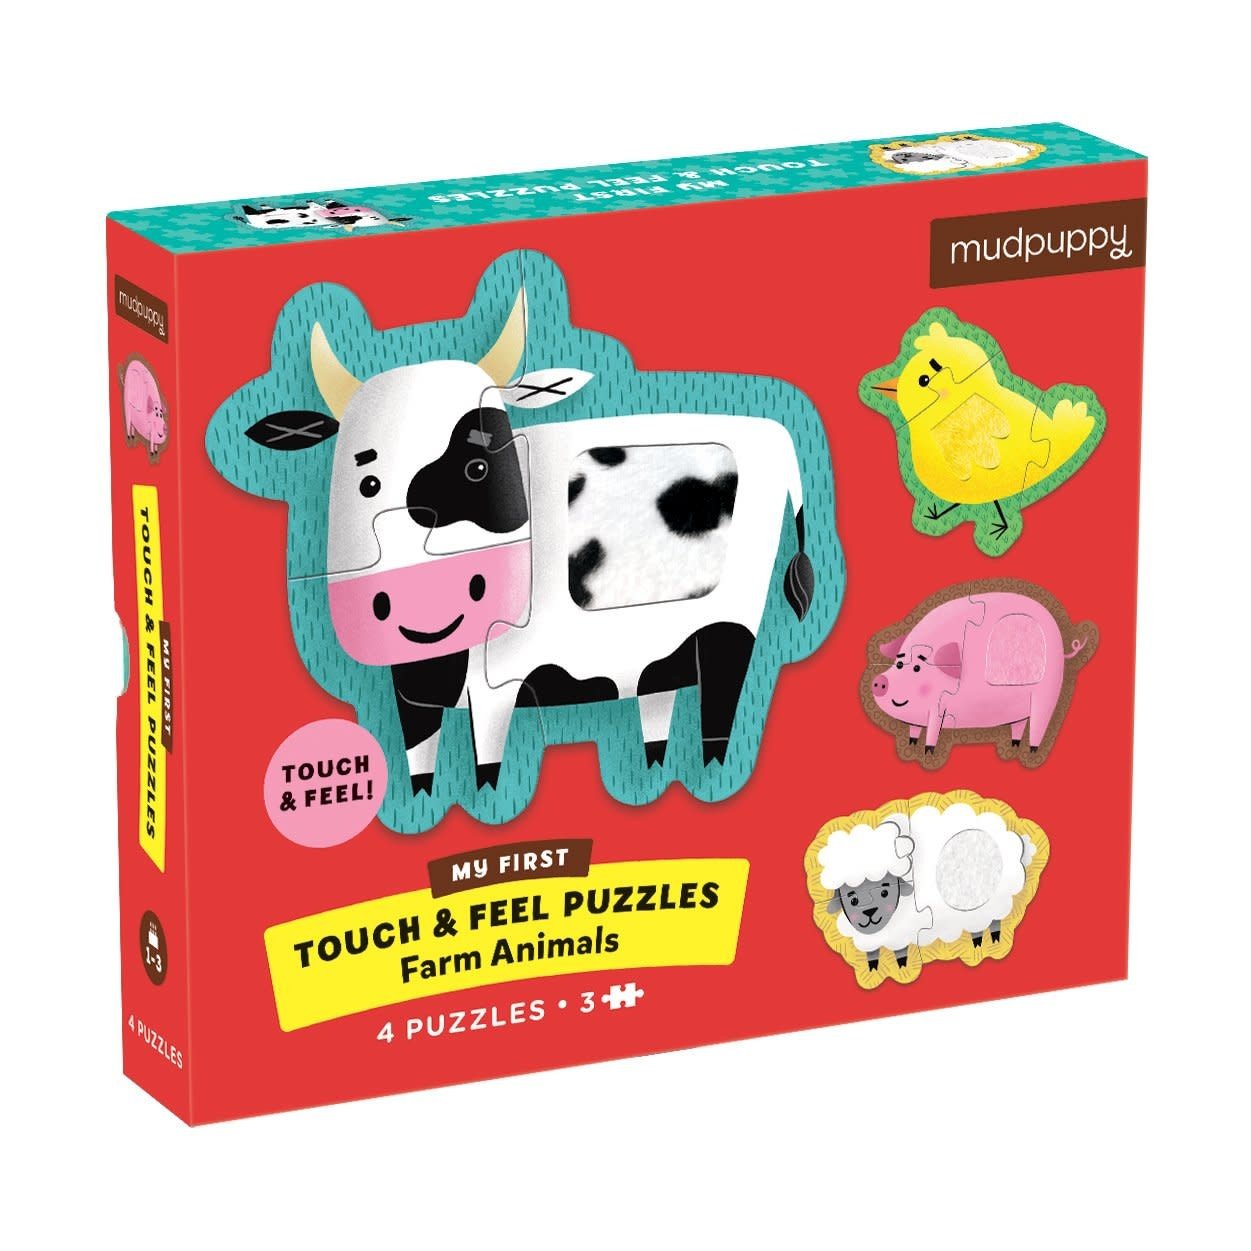 My First Touch & Feel Farm Animals Puzzles